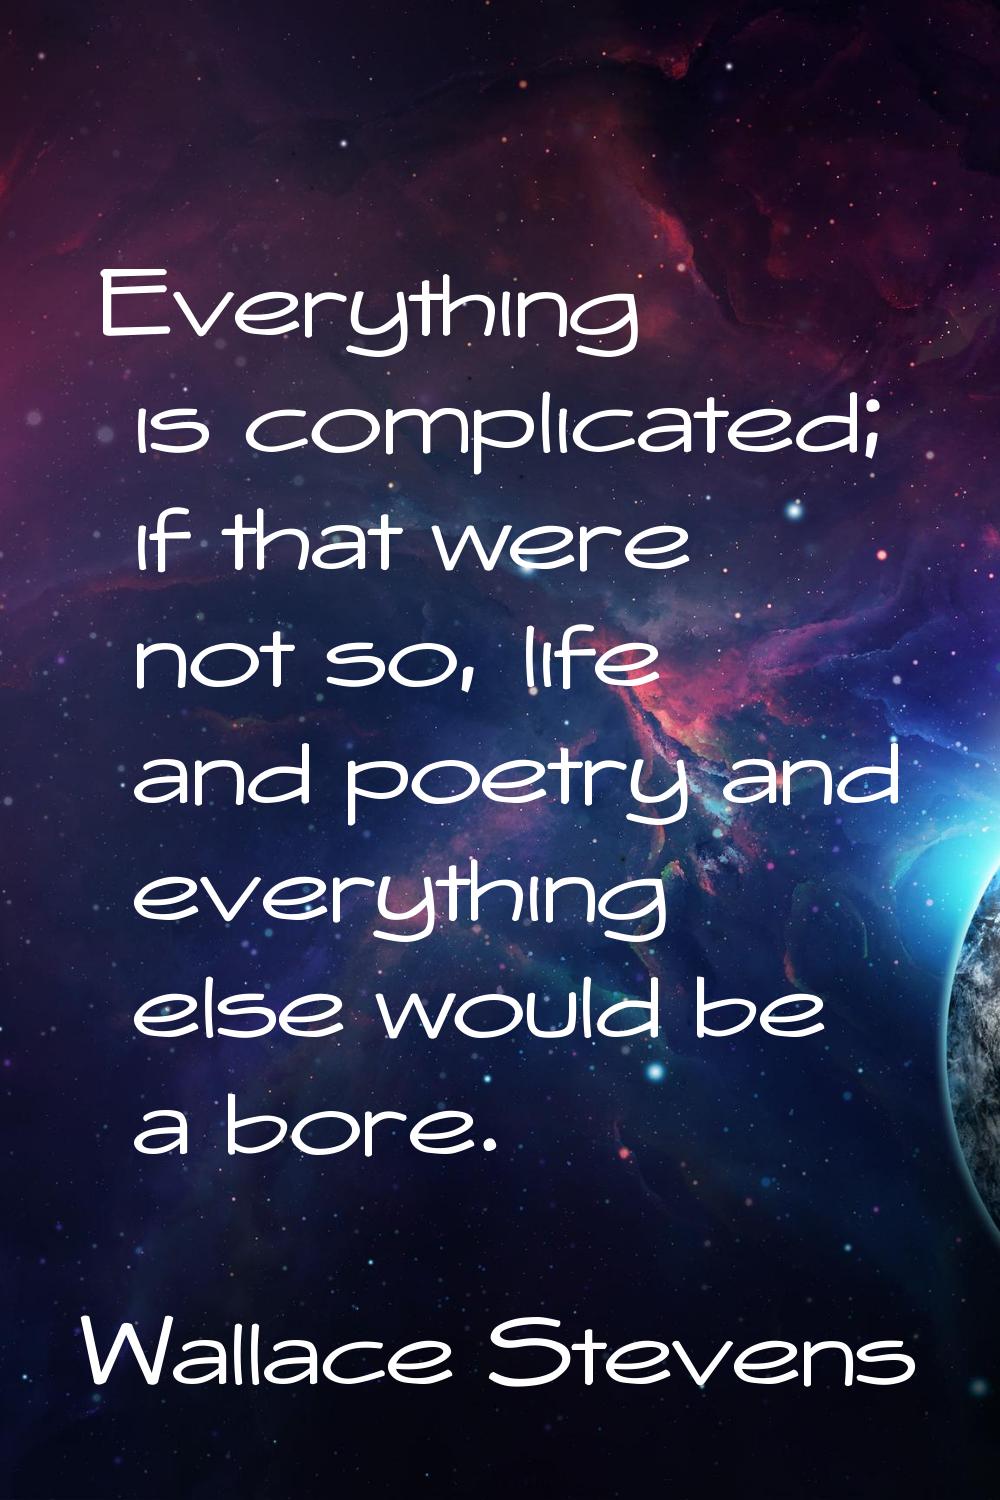 Everything is complicated; if that were not so, life and poetry and everything else would be a bore